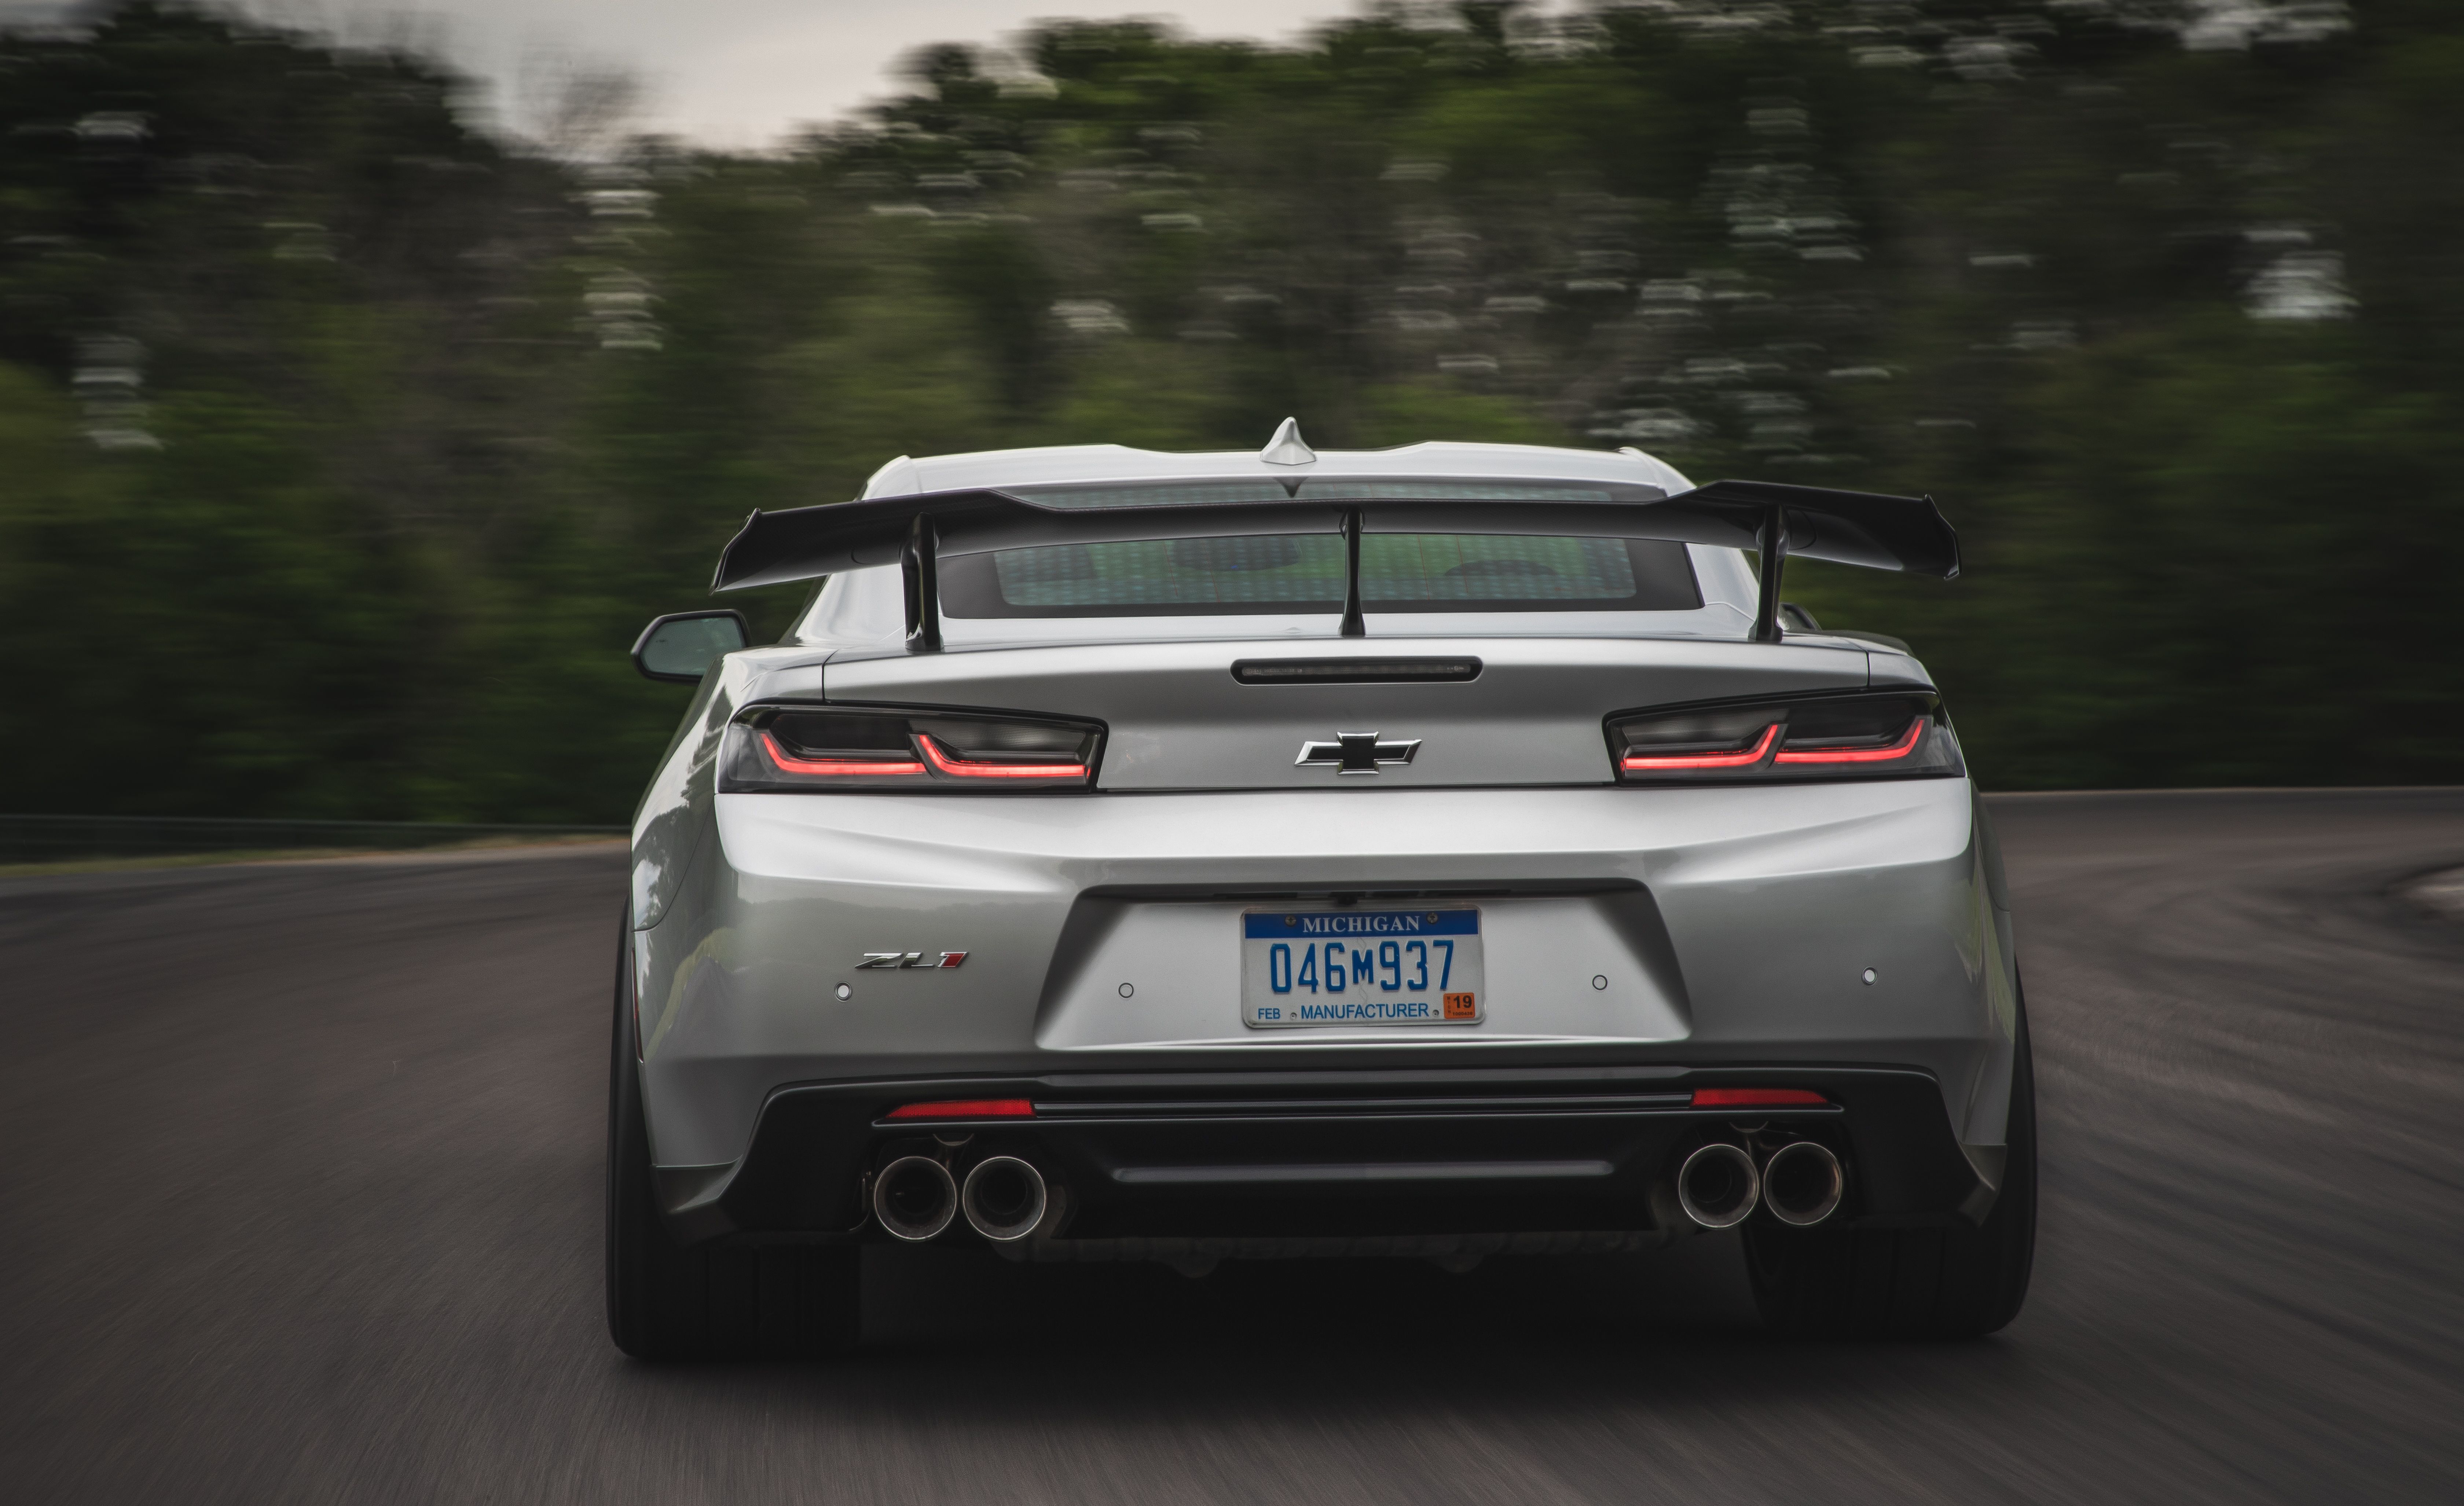 What Sets the Chevrolet Camaro ZL1 1LE Apart from the ZL1